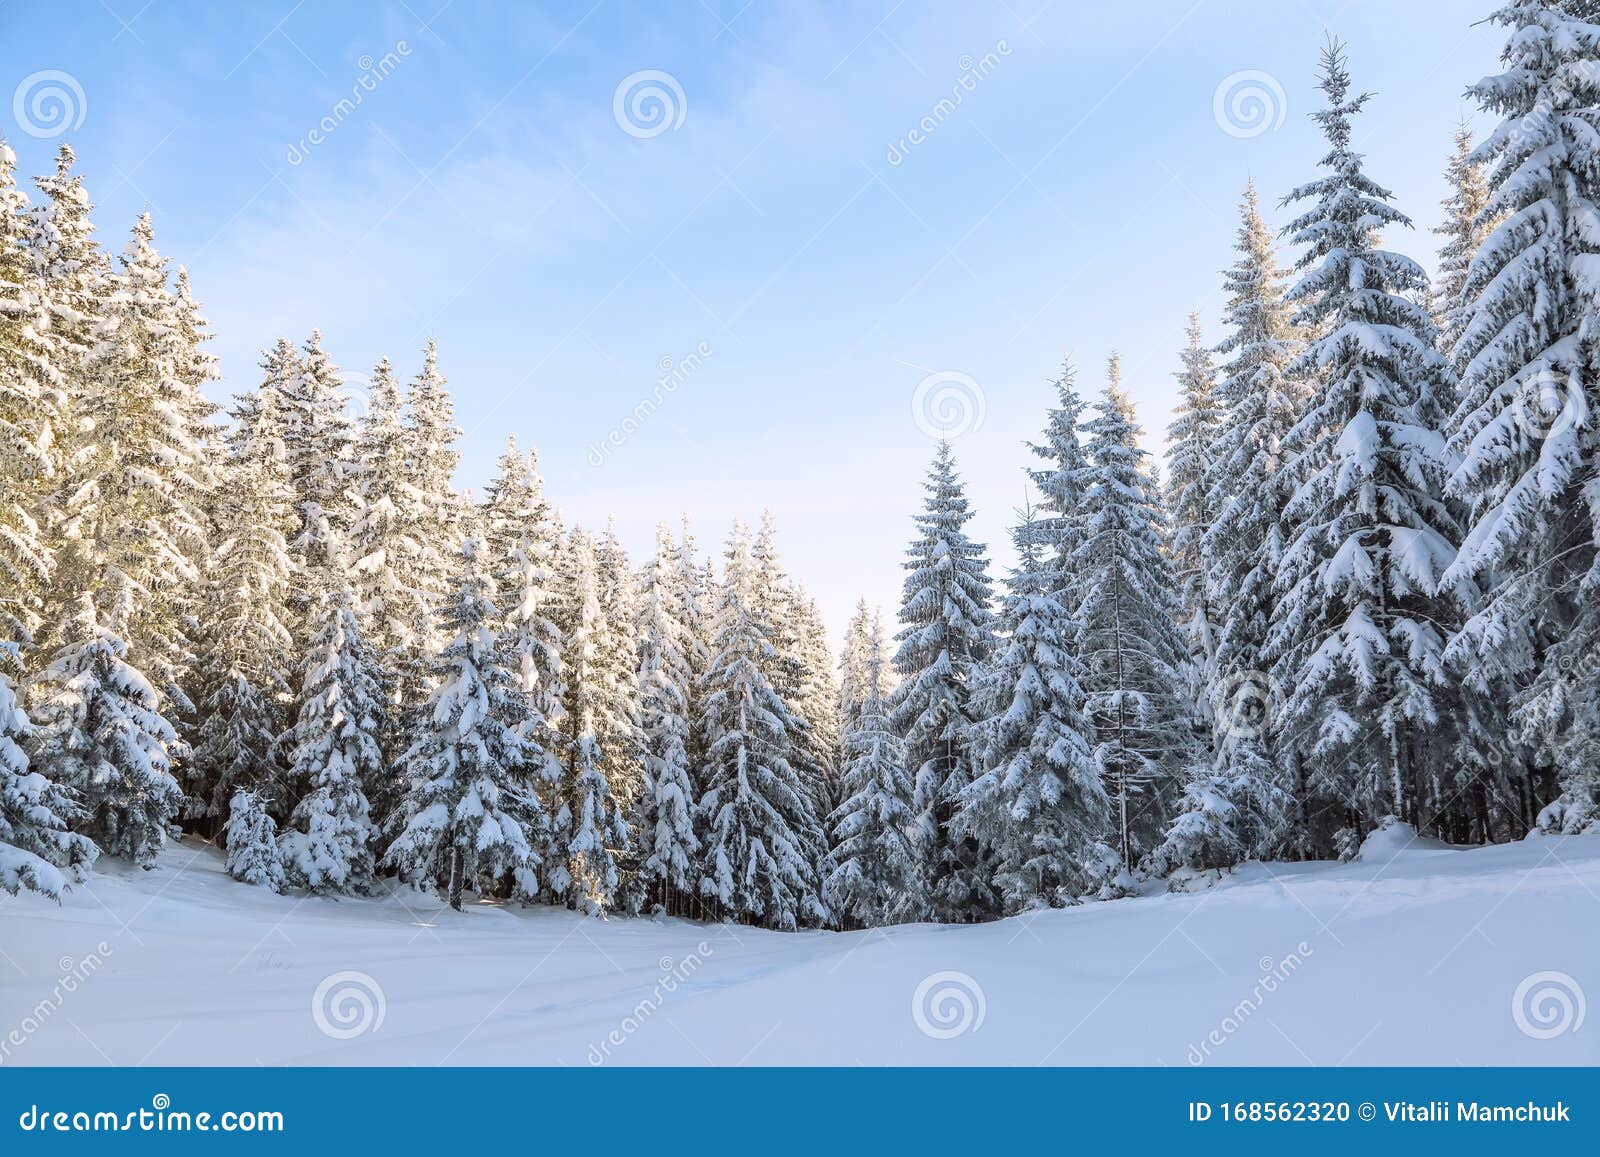 Landscape Winter Forest in Cold Sunny Day. the Fluffy Pine Trees Covered  with White Snow. Wallpaper Snowy Background Stock Photo - Image of cloud,  mountain: 168562320